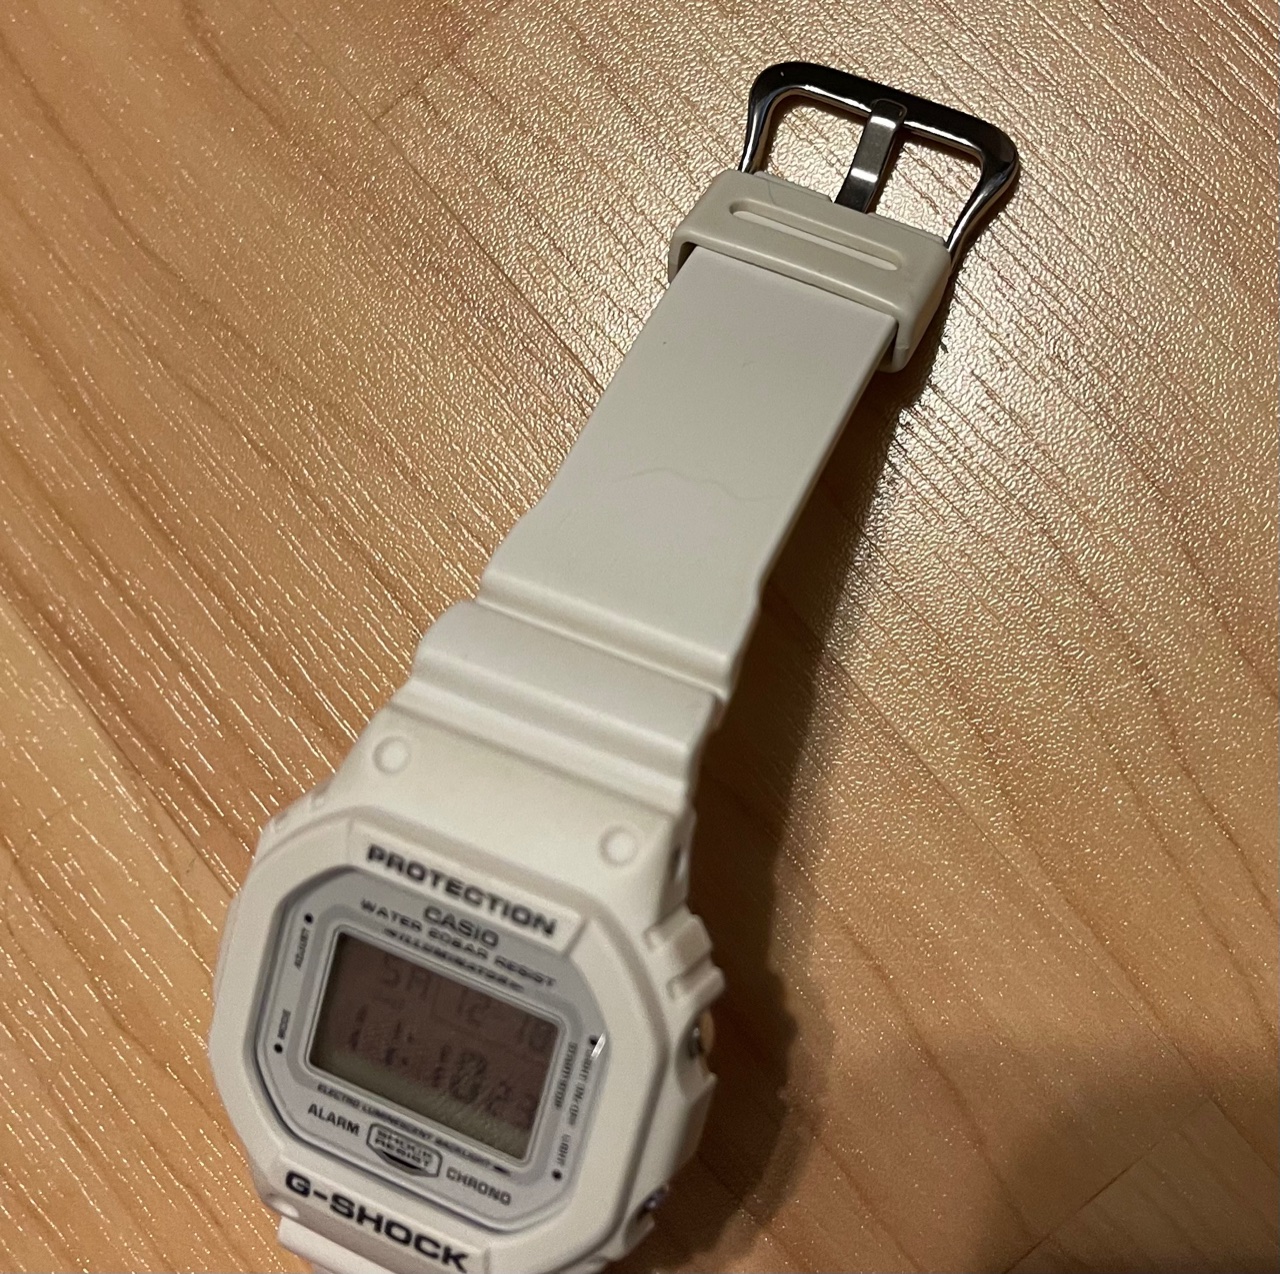 WTS] Casio G-Shock DW-5600MW-7 Special Color Models Square White ...